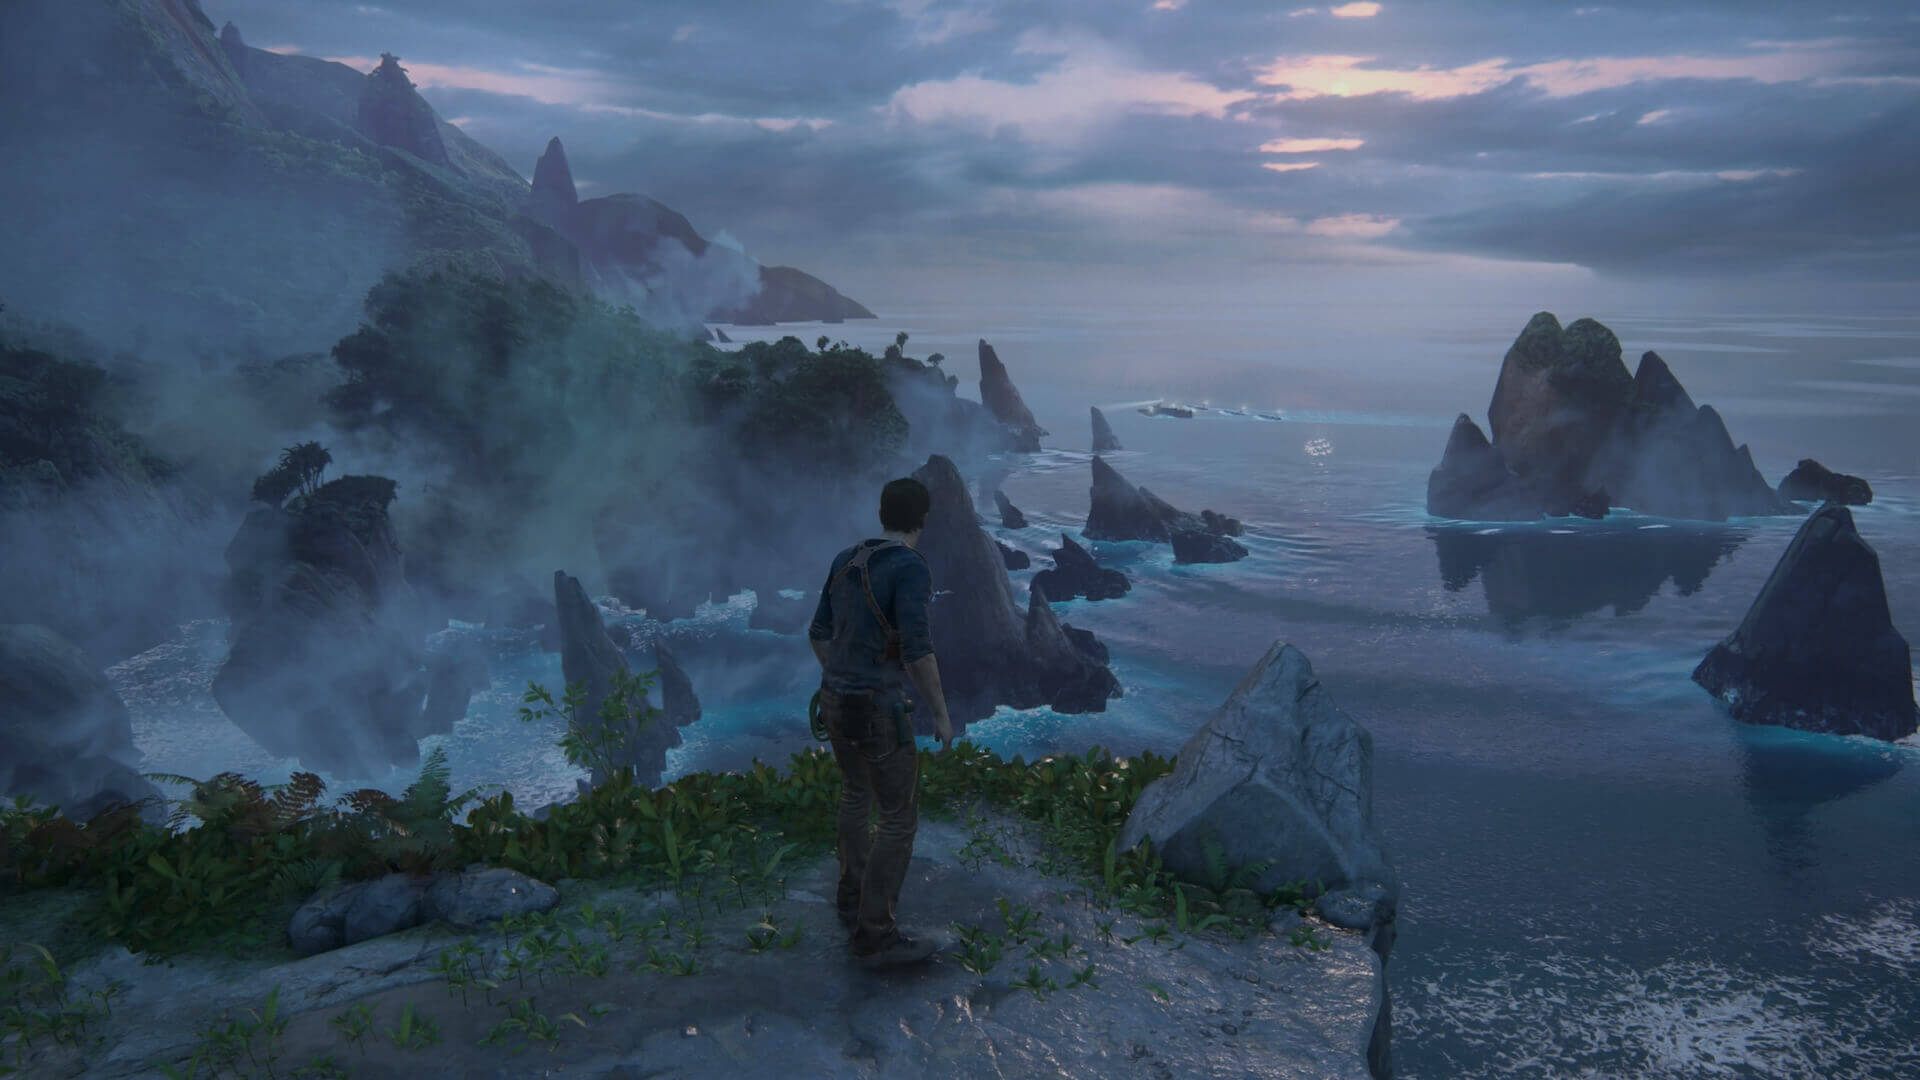 Uncharted 4, Uncharted Legacy of Thieves, Uncharted, Naughty Dog, Sony, Playstation, PS5